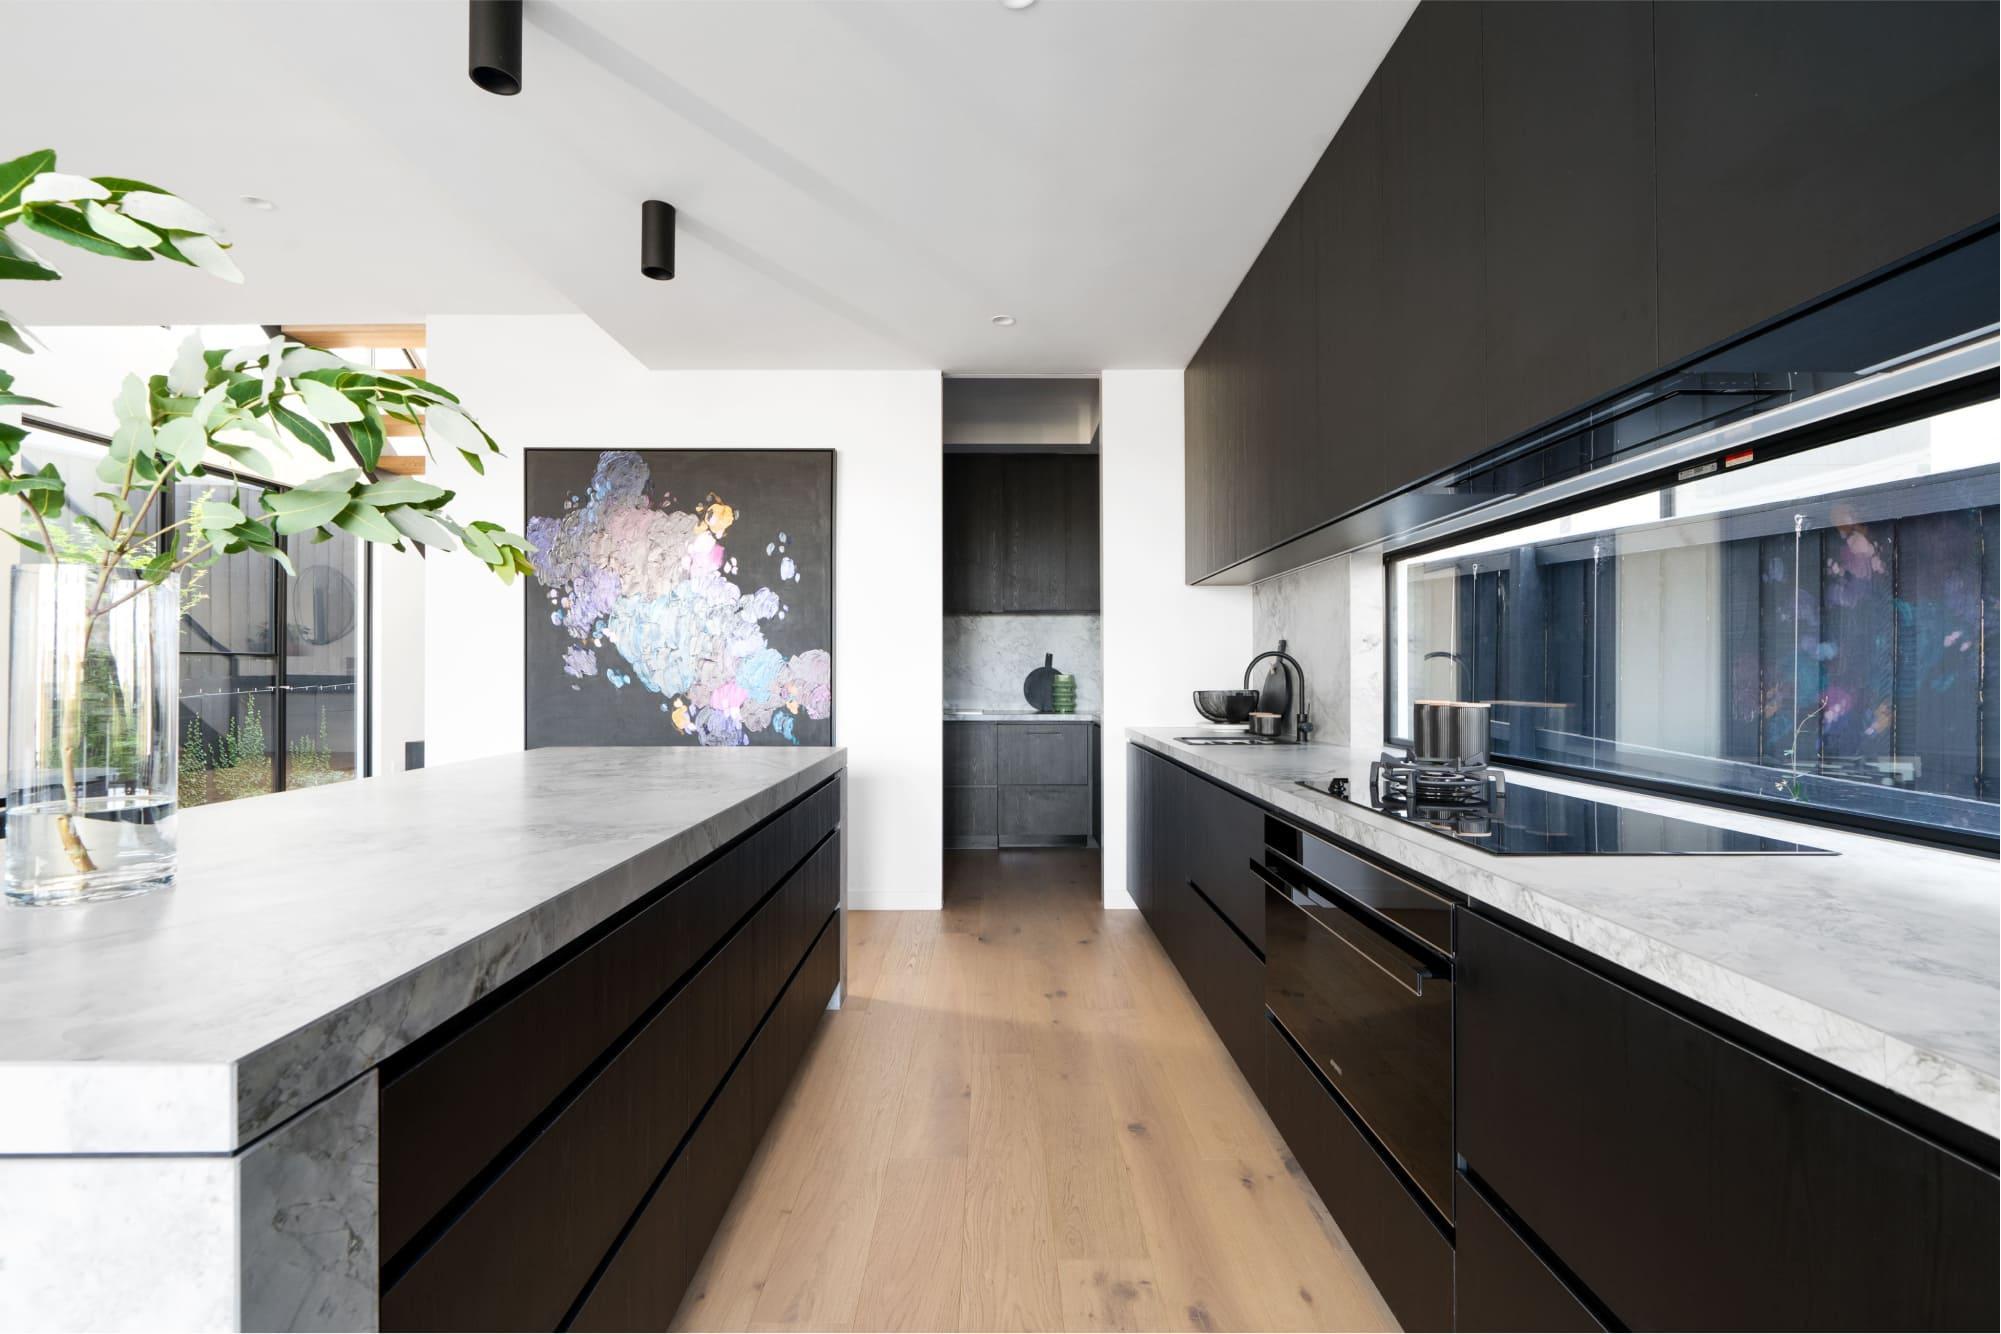 A modern kitchen with oak timber flooring, stone benches and discreet butlers kitchen